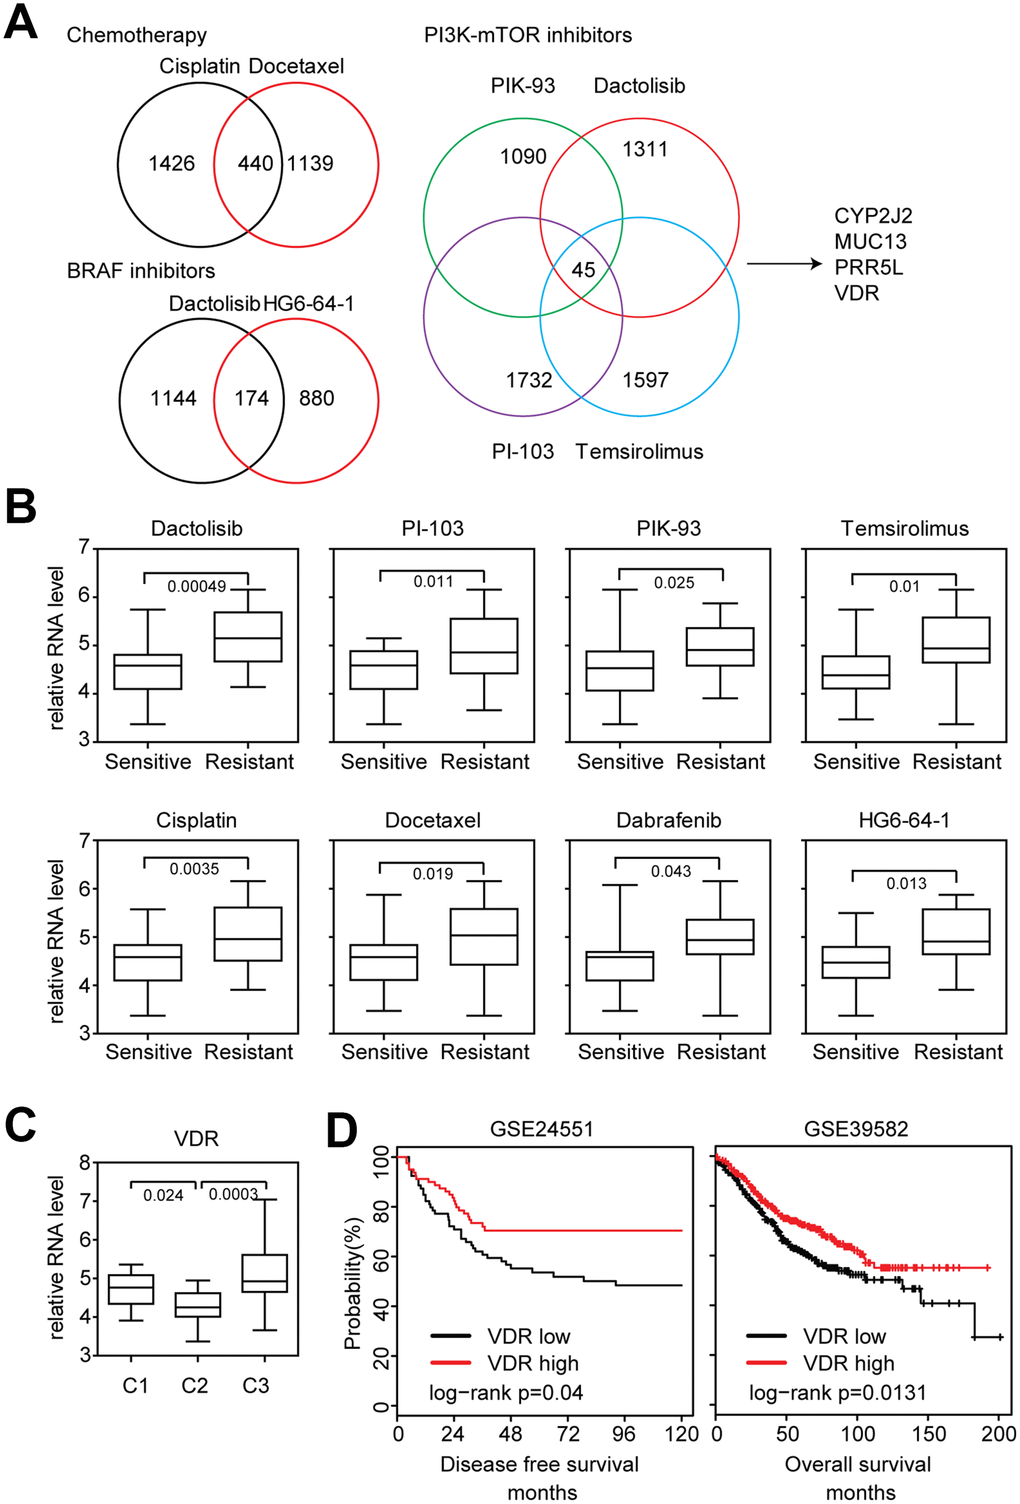 Lack of VDR expression is associated with the sensitivity of chemotherapy, BRAF inhibitors and PI3K-mTOR inhibitors. (A) Venny diagrams depicted the common genes associated with chemotherapy, BRAF inhibitors and PI3K-mTOR inhibitors sensitivity. (B) Box plots showed the VDR expression in chemotherapy, BRAF inhibitors, PI3K-mTOR inhibitors sensitive and resistant colon cancer cells. (C) Box plots showed the VDR expression in each sub-cluster of colon cancer cells. (D) Relationships of VDR expression and disease free survival or overall survival were analyzed from GSE24551 and GSE39582 datasets.